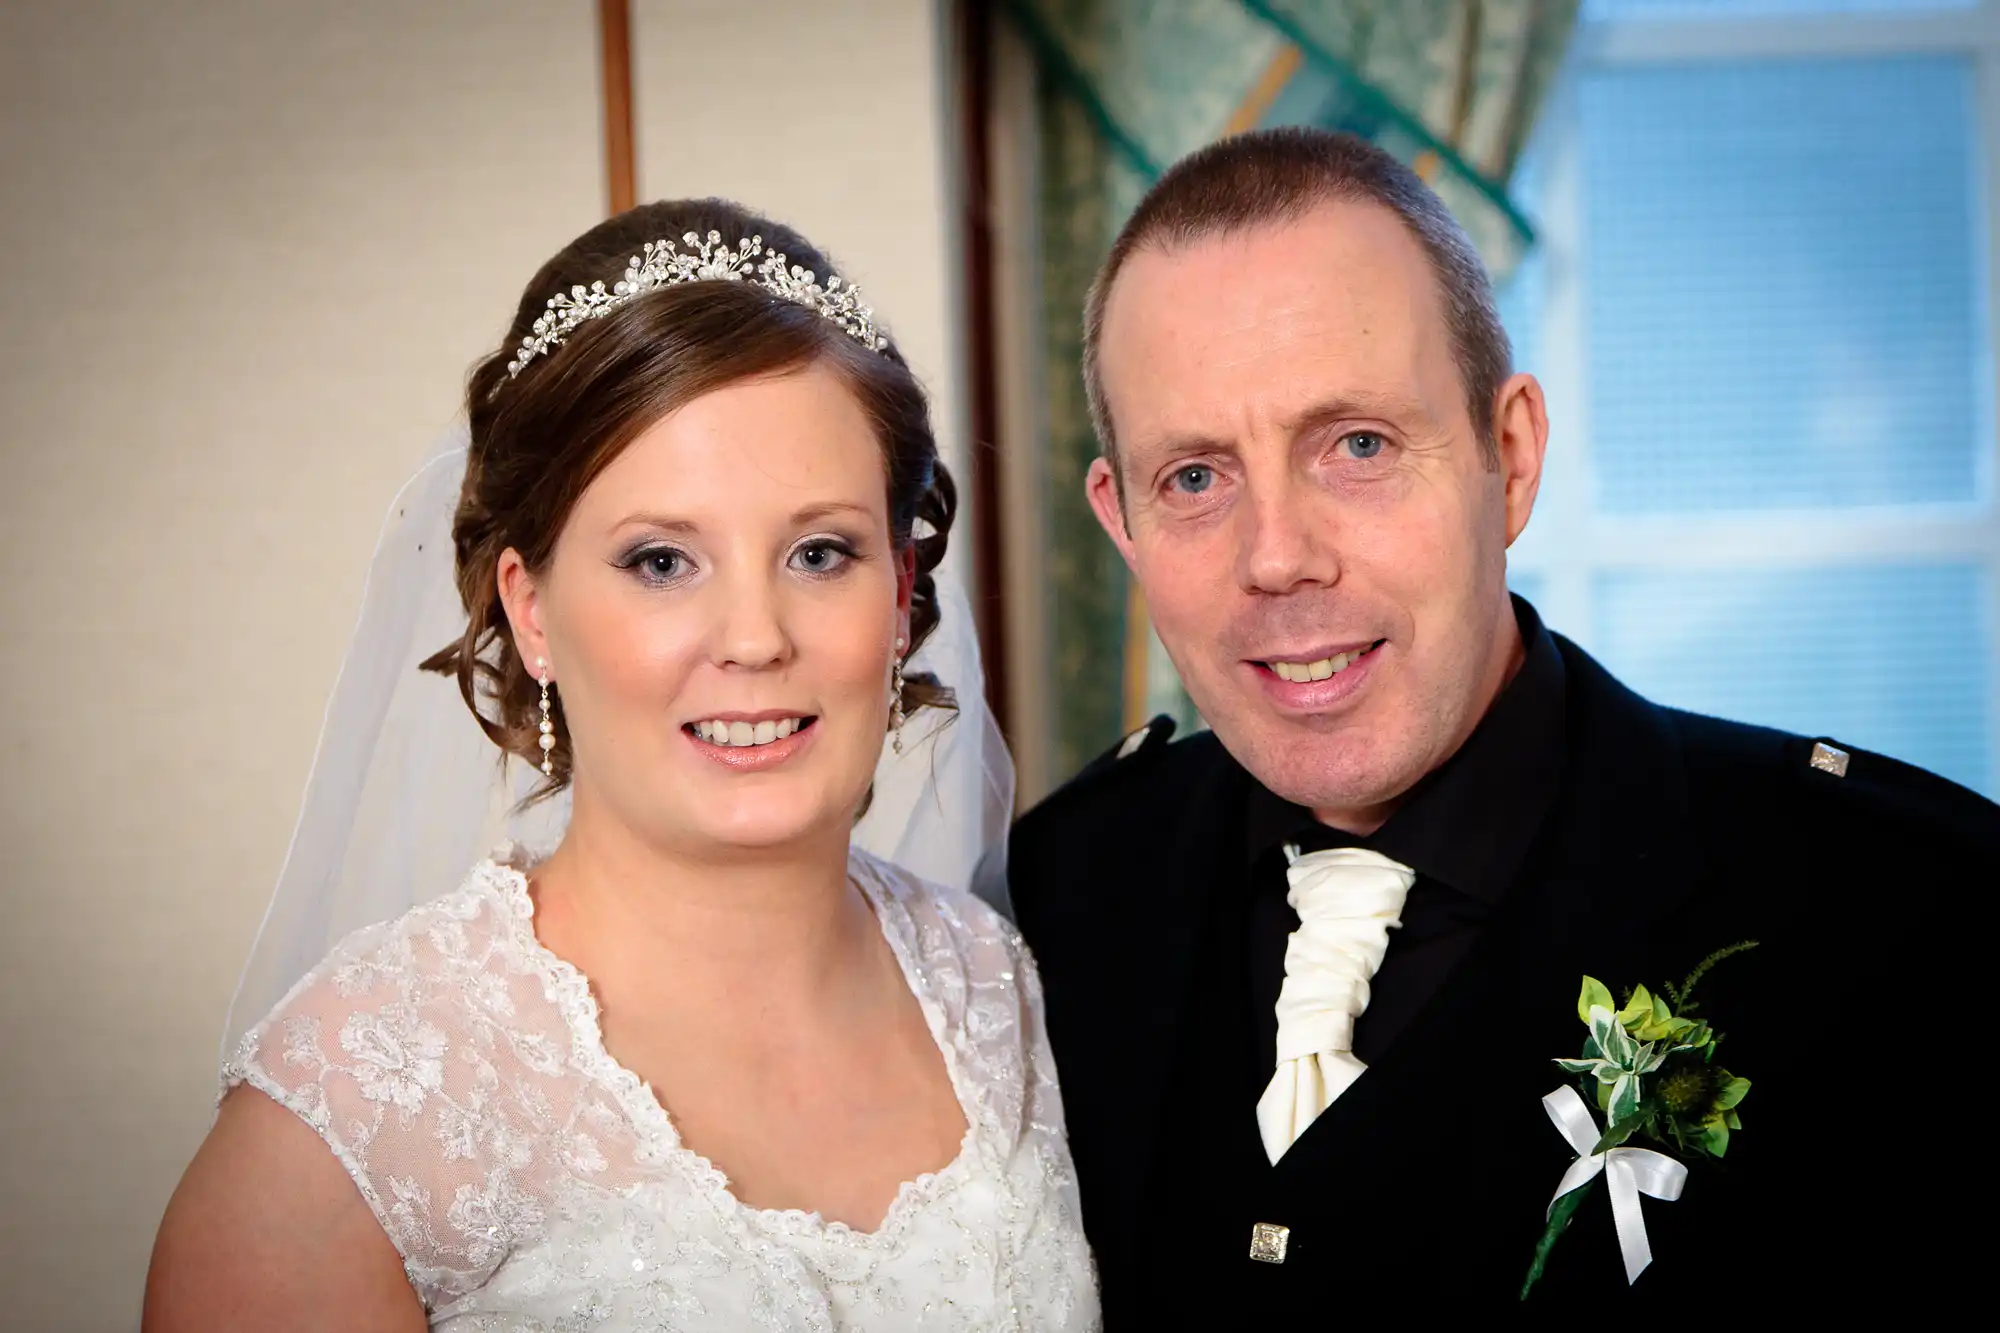 A bride and groom smiling in formal wedding attire, with the bride wearing a lace dress and tiara, and the groom in a black suit with a white tie and boutonniere.